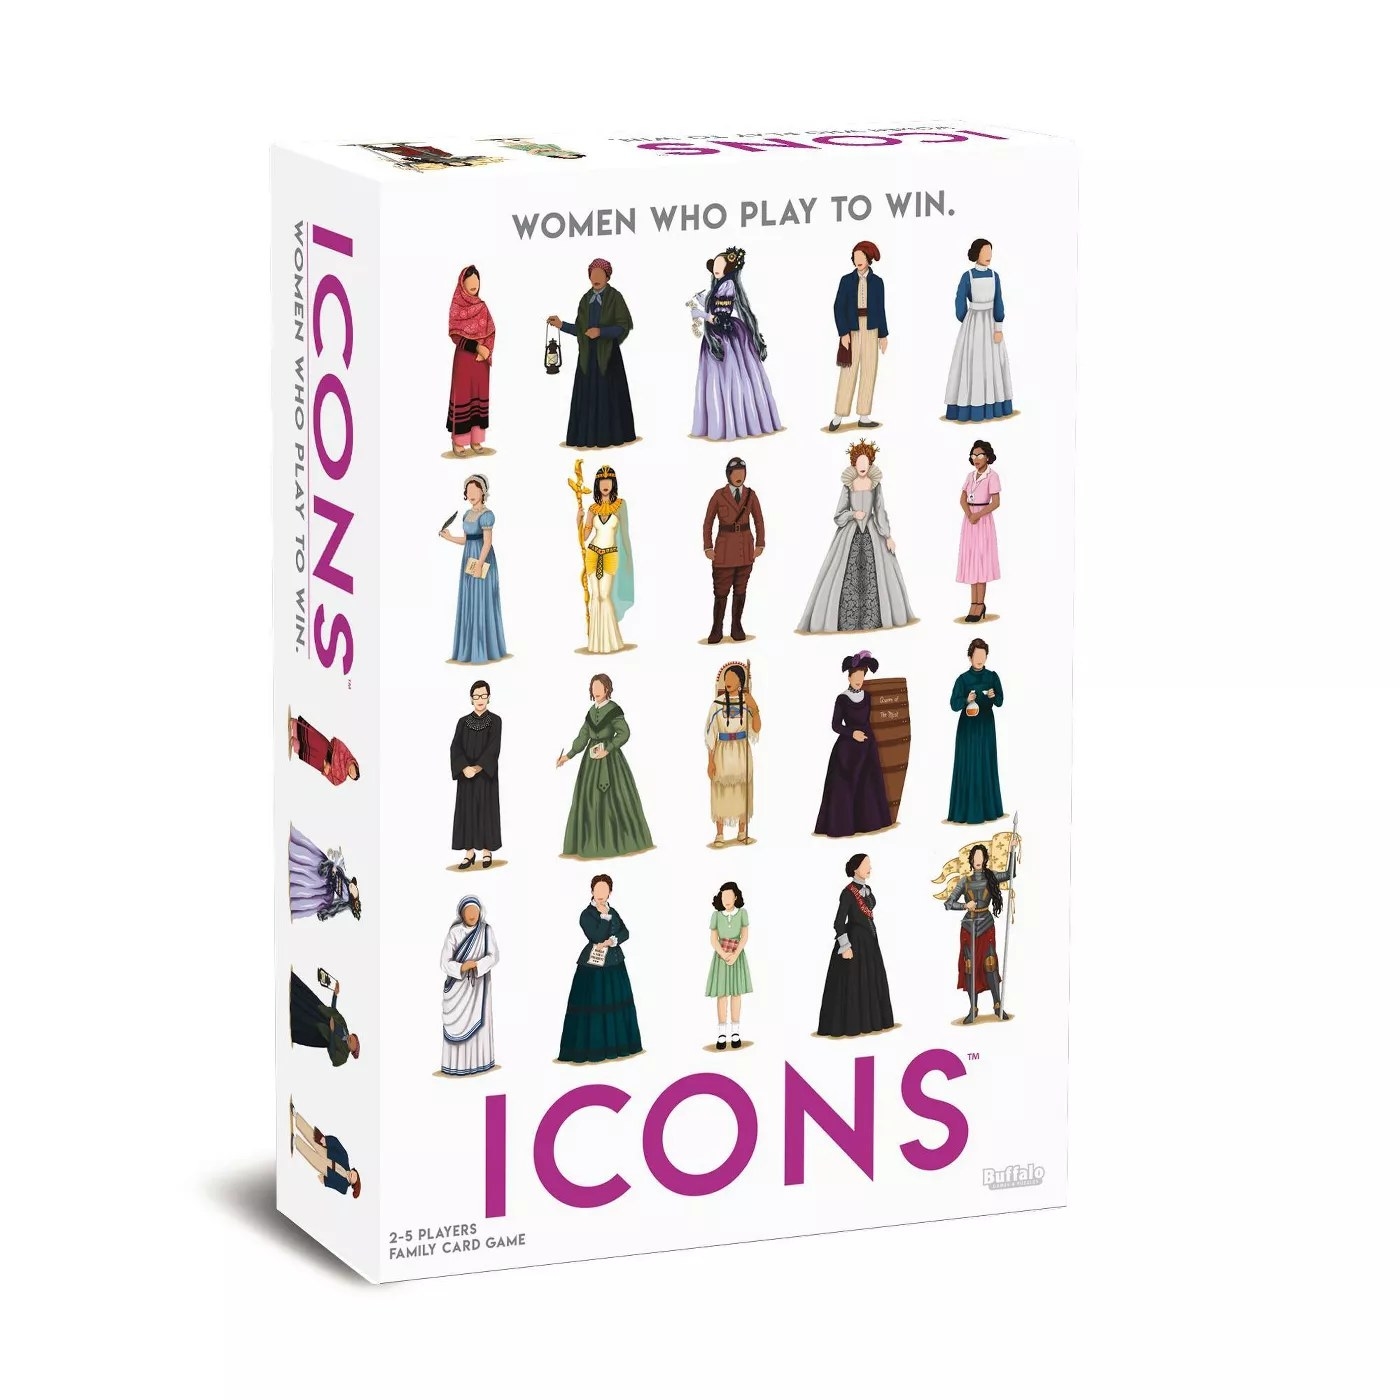 The Icons card game